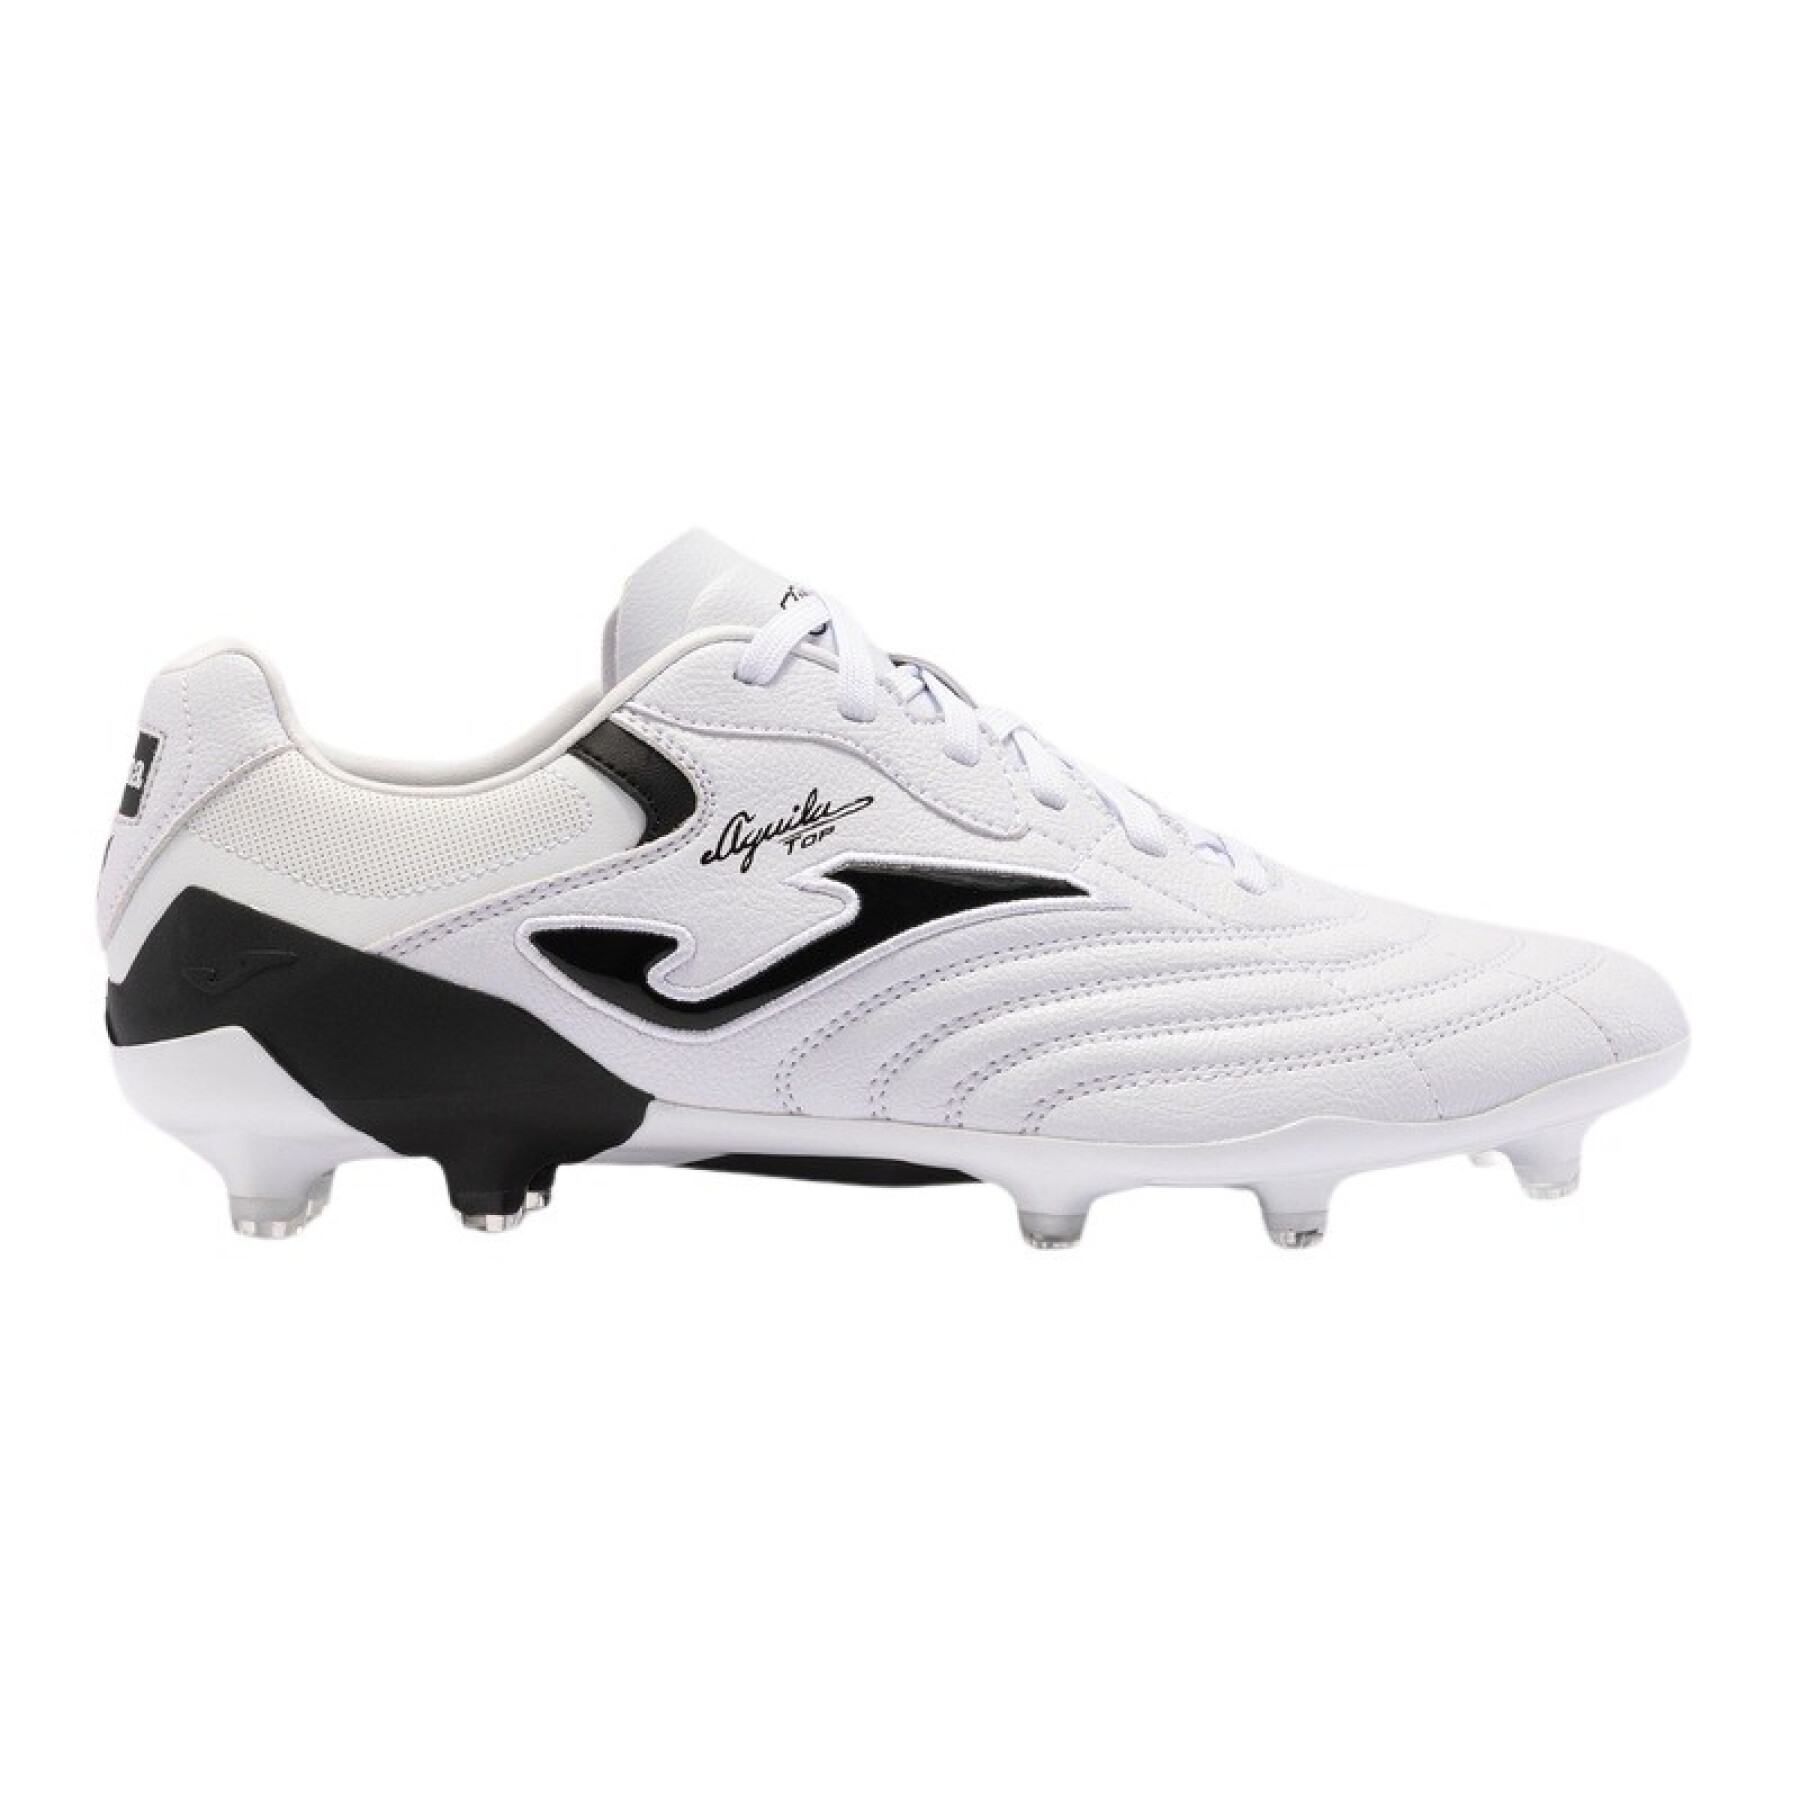 Chaussures de football Joma Aguila Cup 2402 FG